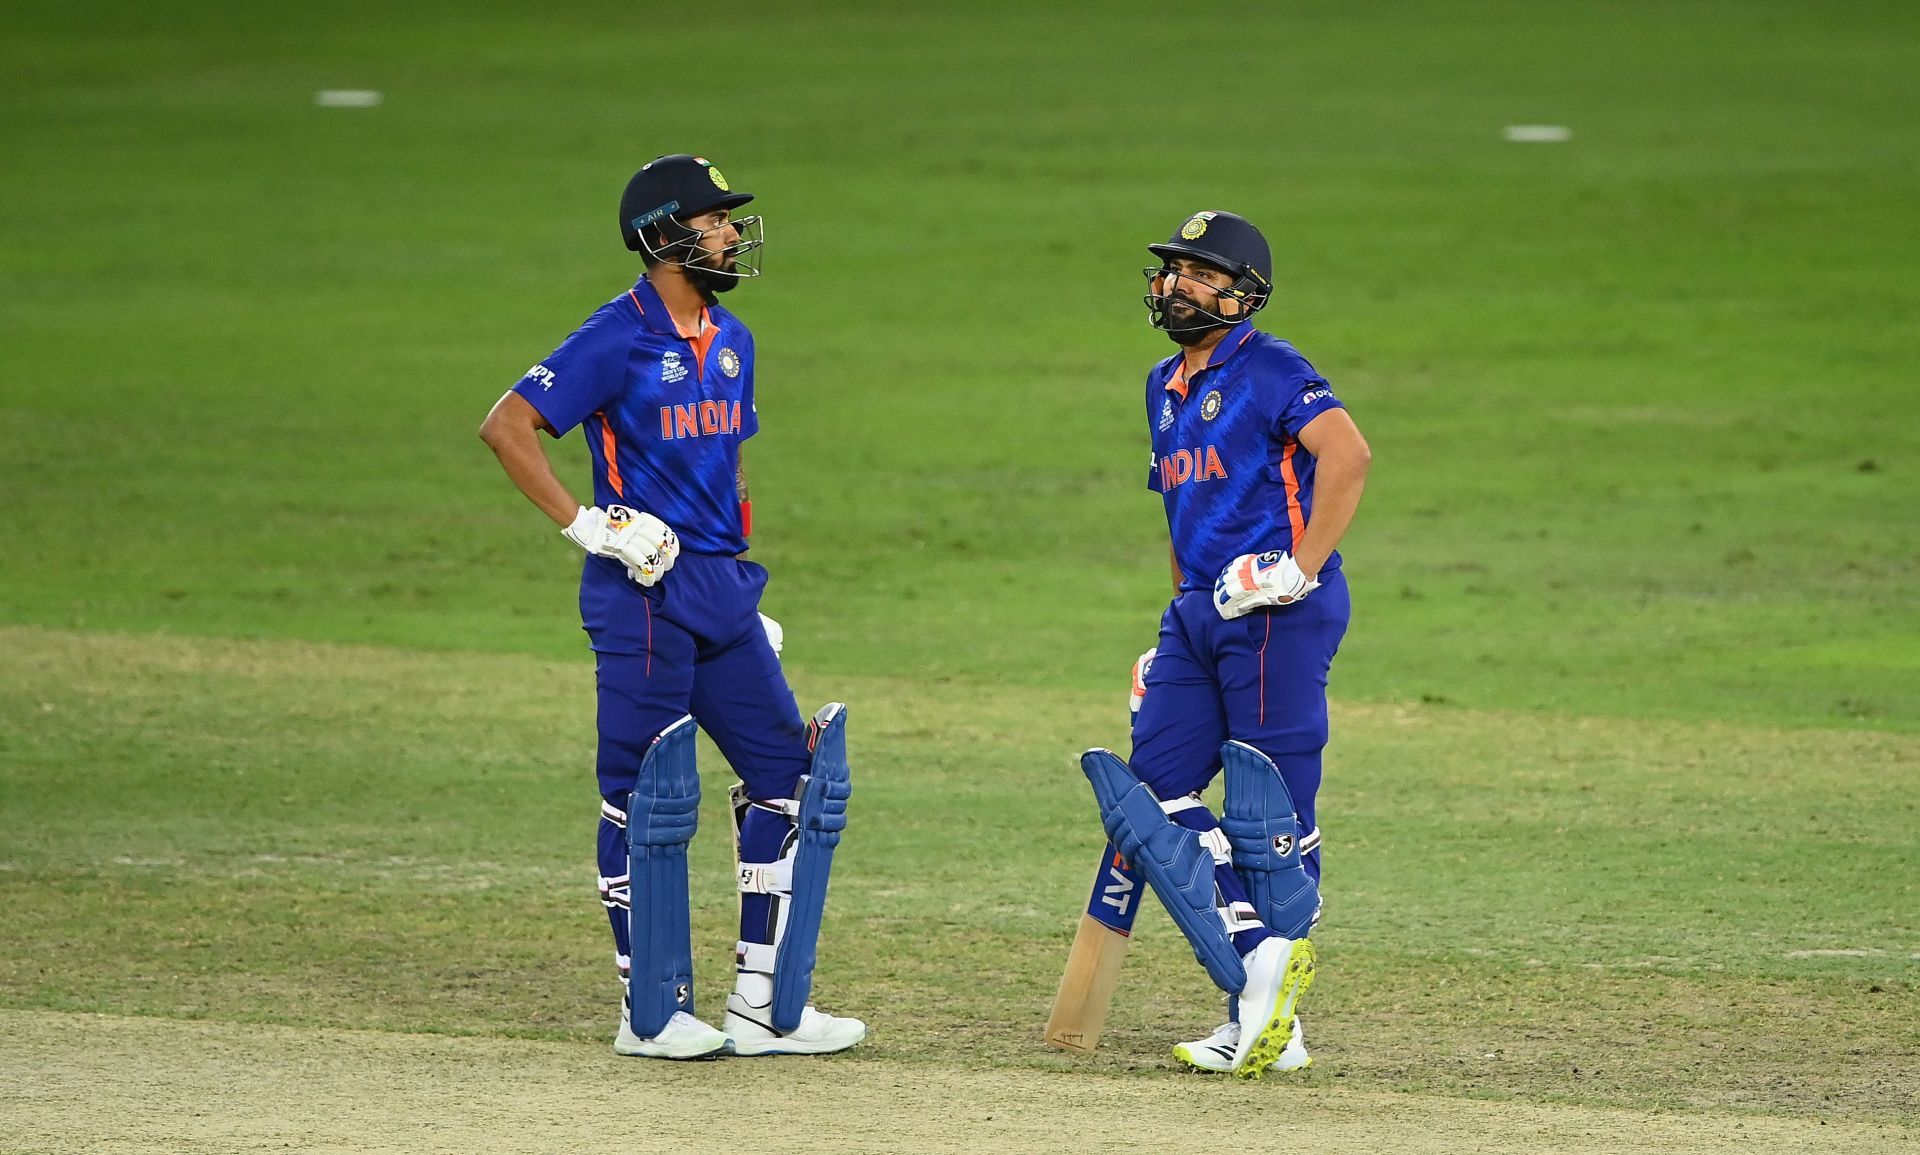 KL Rahul and Rohit Sharma are expected to open the batting in Australia.